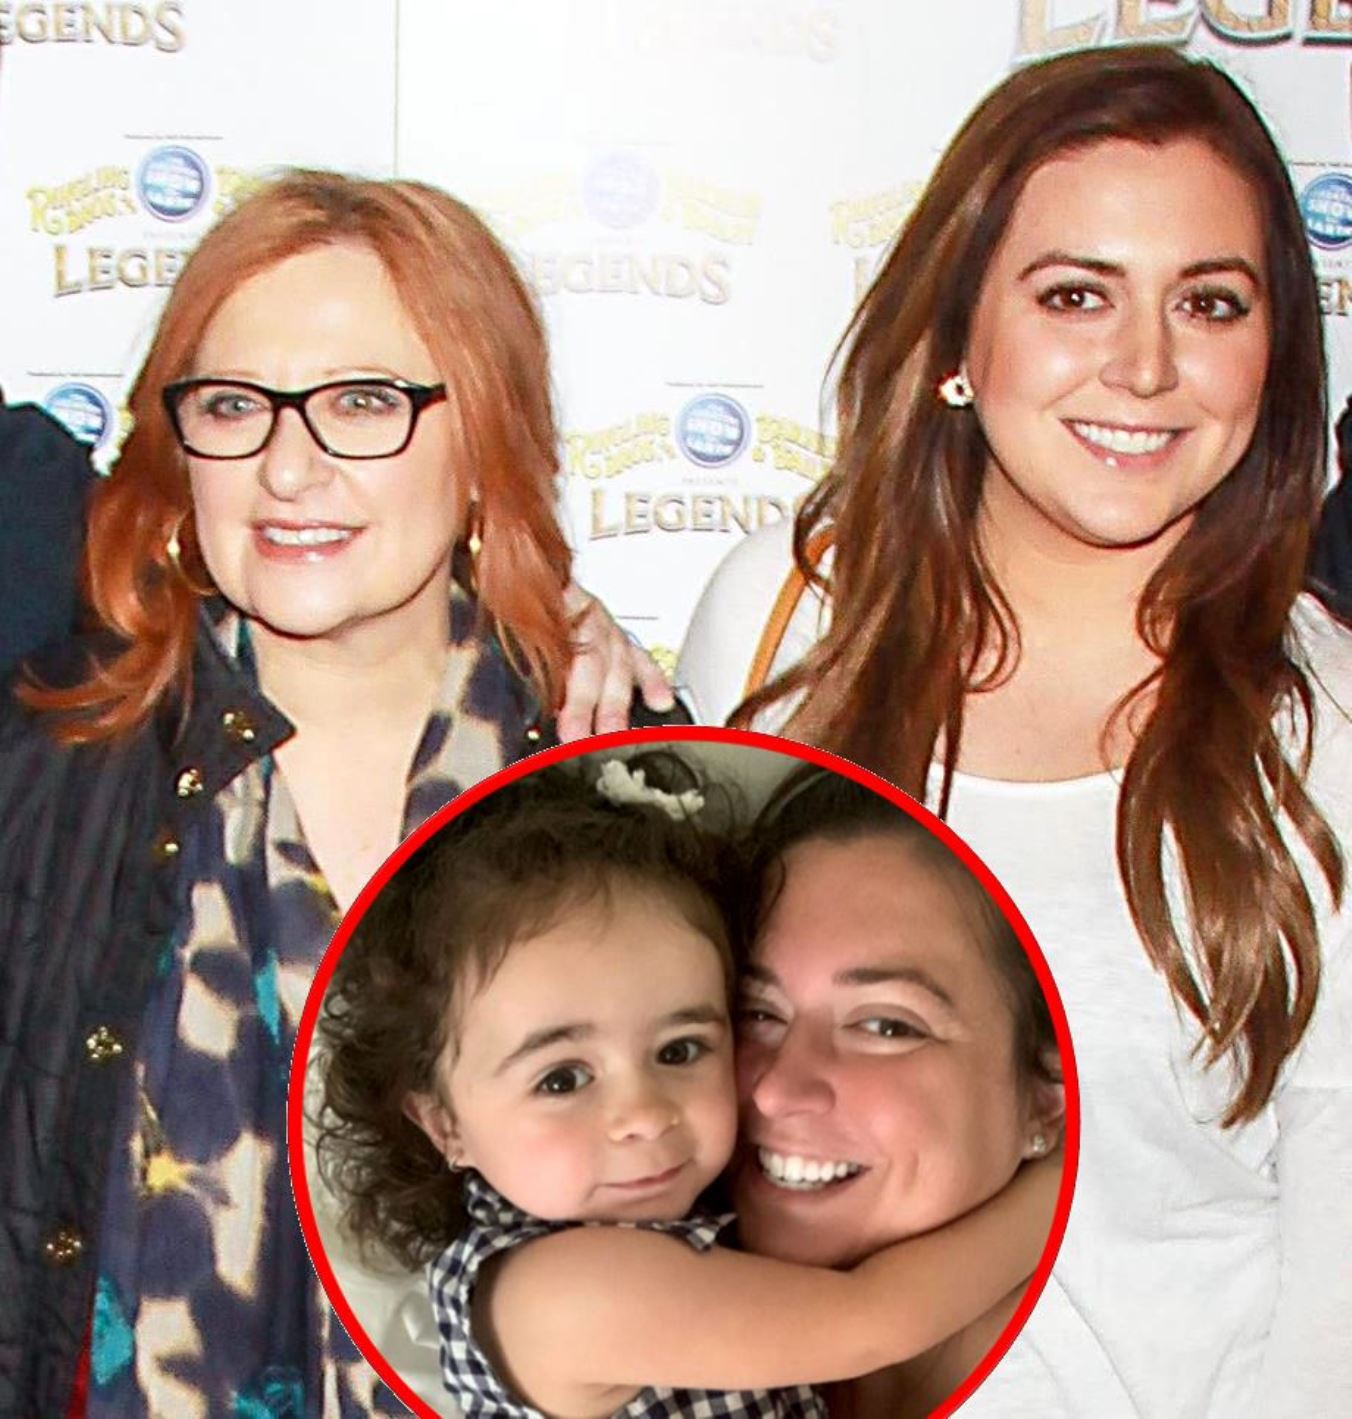 Ex RHONJ Star Lauren Manzo Announces She Will No Longer Be Sharing Photos of Daughter Markie on Instagram After Receiving "Insane" and "Mean" Comments as Caroline Manzo Also Claps Back at Followers